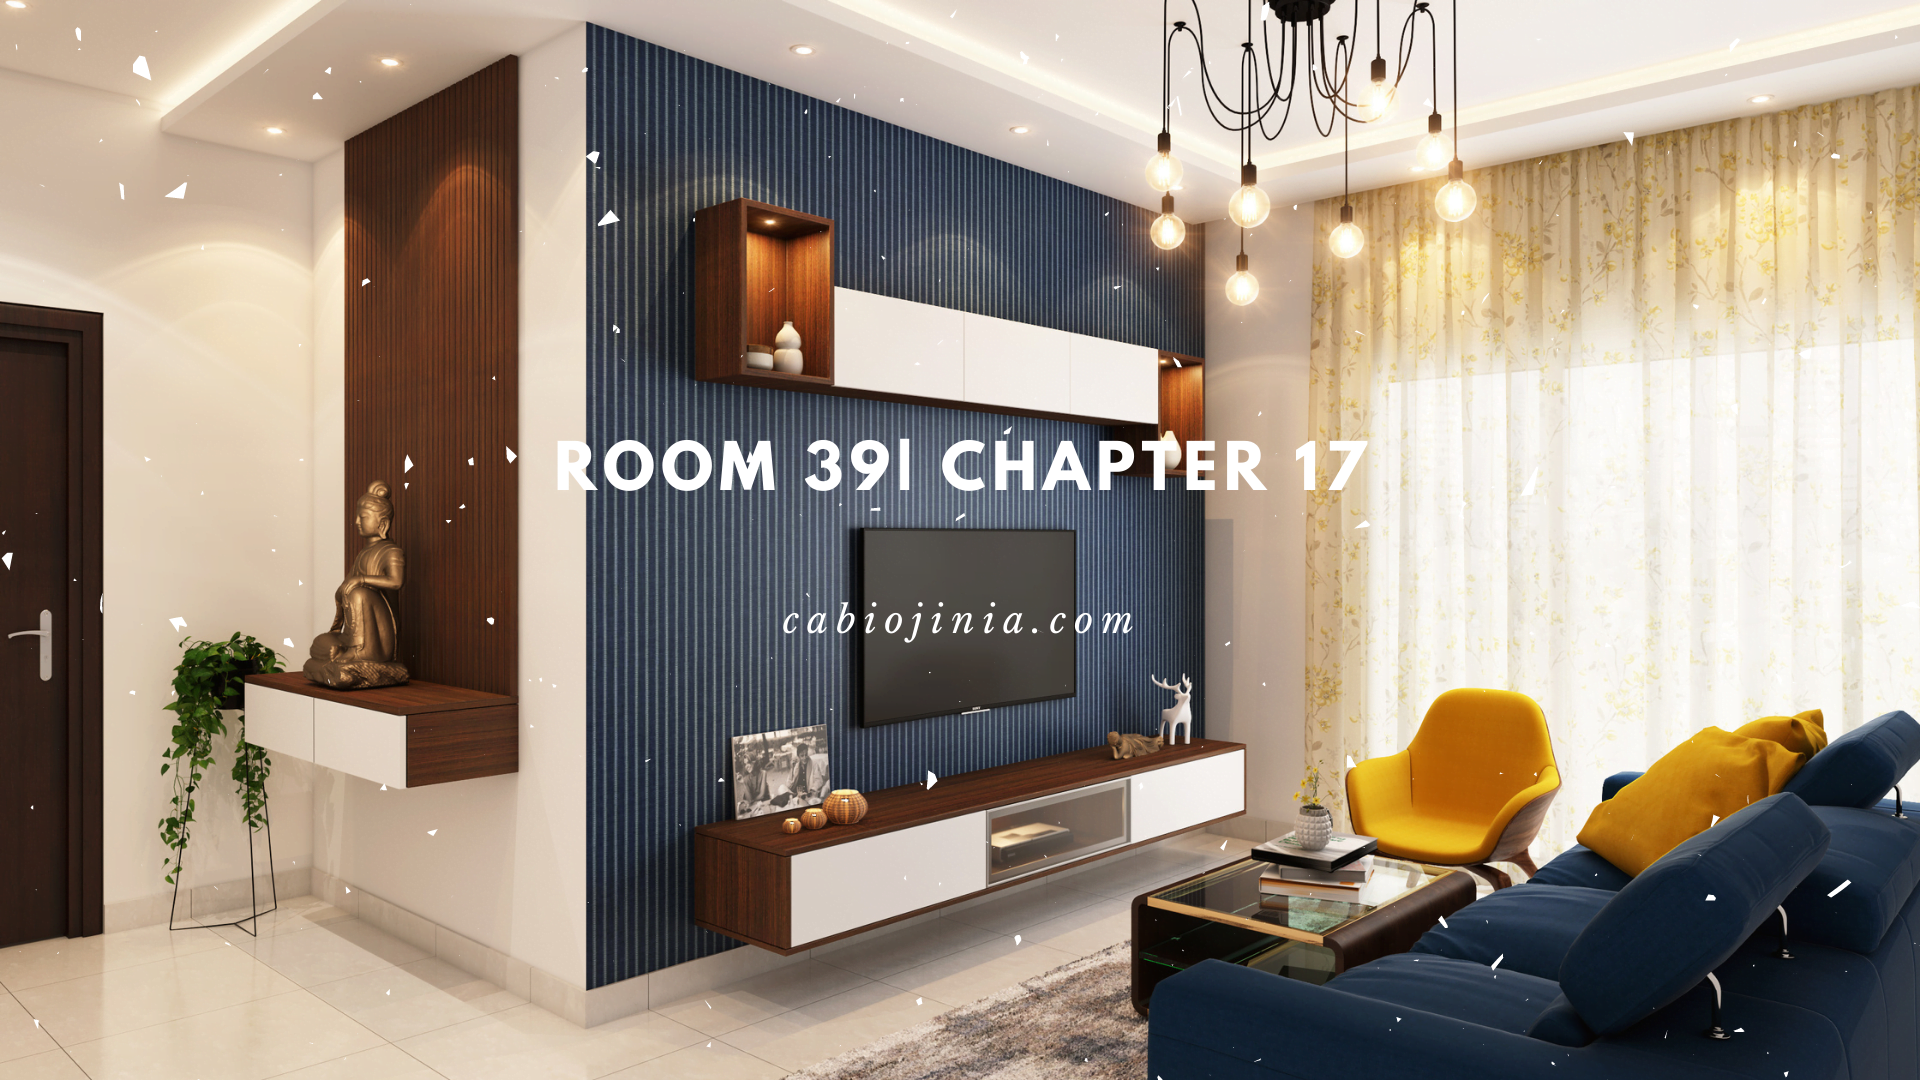 Room 39| Chapter 17 by Cabiojinia